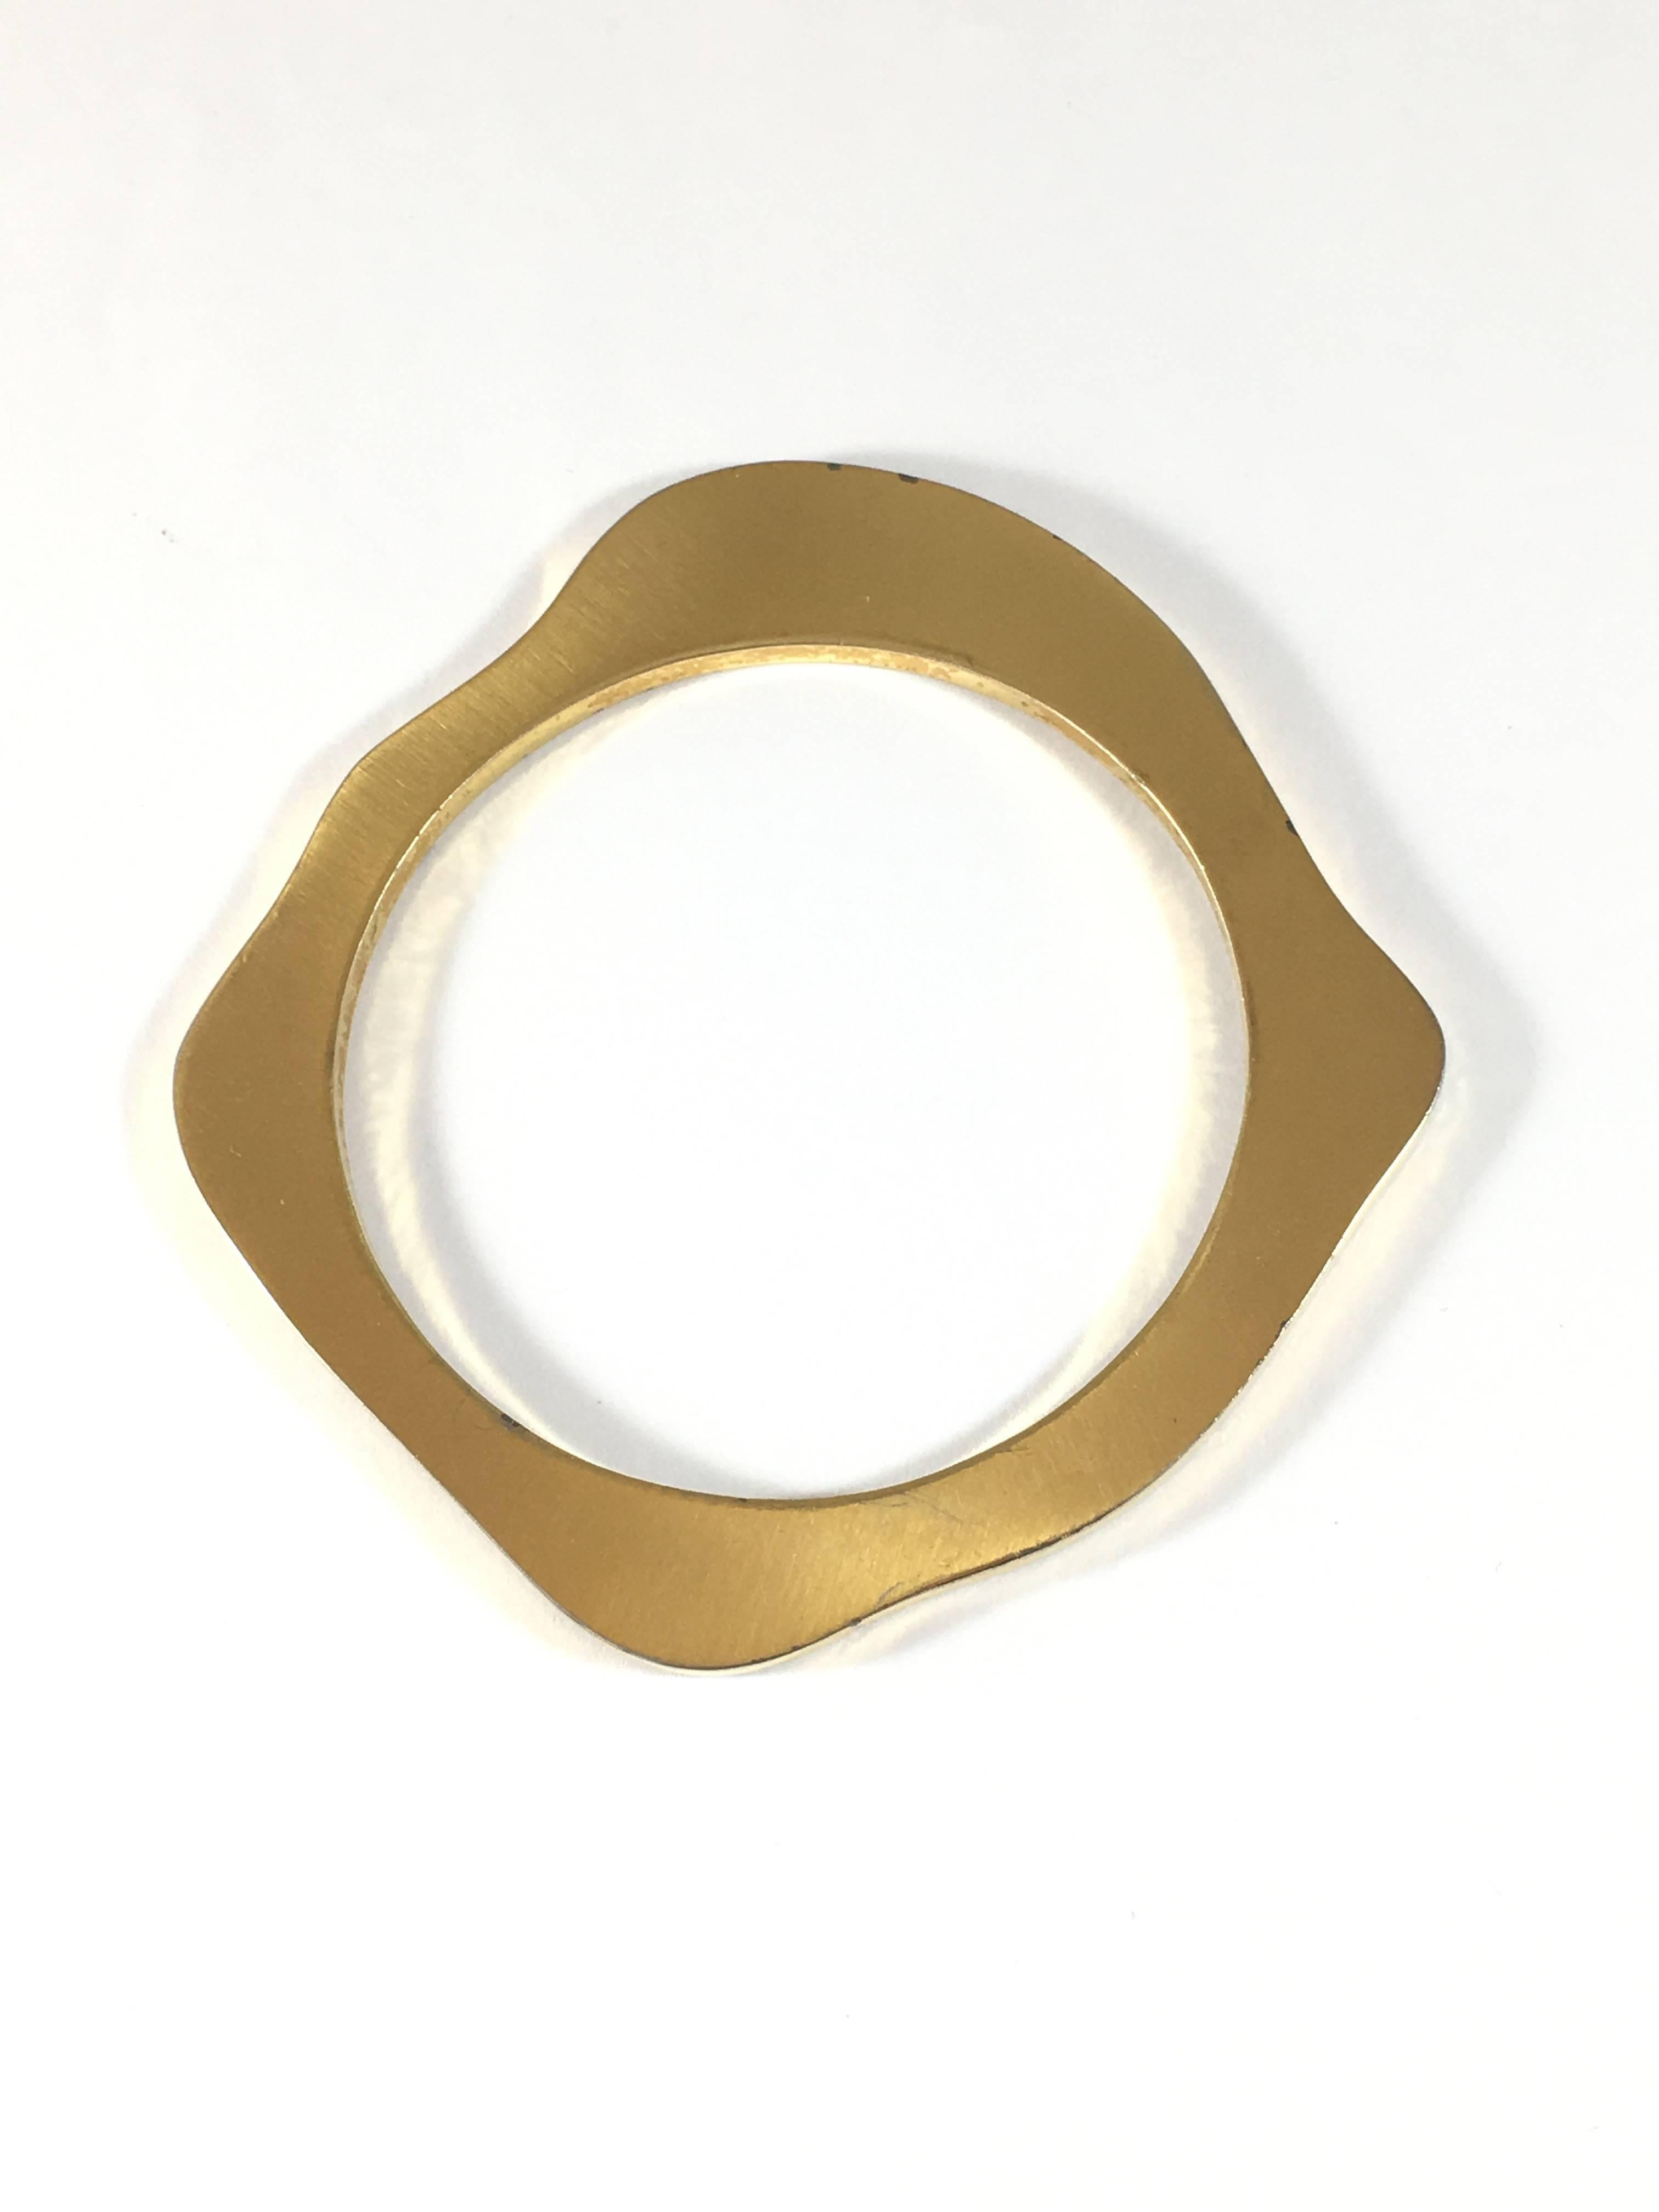 This is a MOD 1960s Pierre Cardin goldtone bangle bracelet. The interior diameter measures 2 1/2 inches. It is signed 'Pierre Cardin' on one side. The bracelet is in overall good condition with the exception of some places where there is war to the